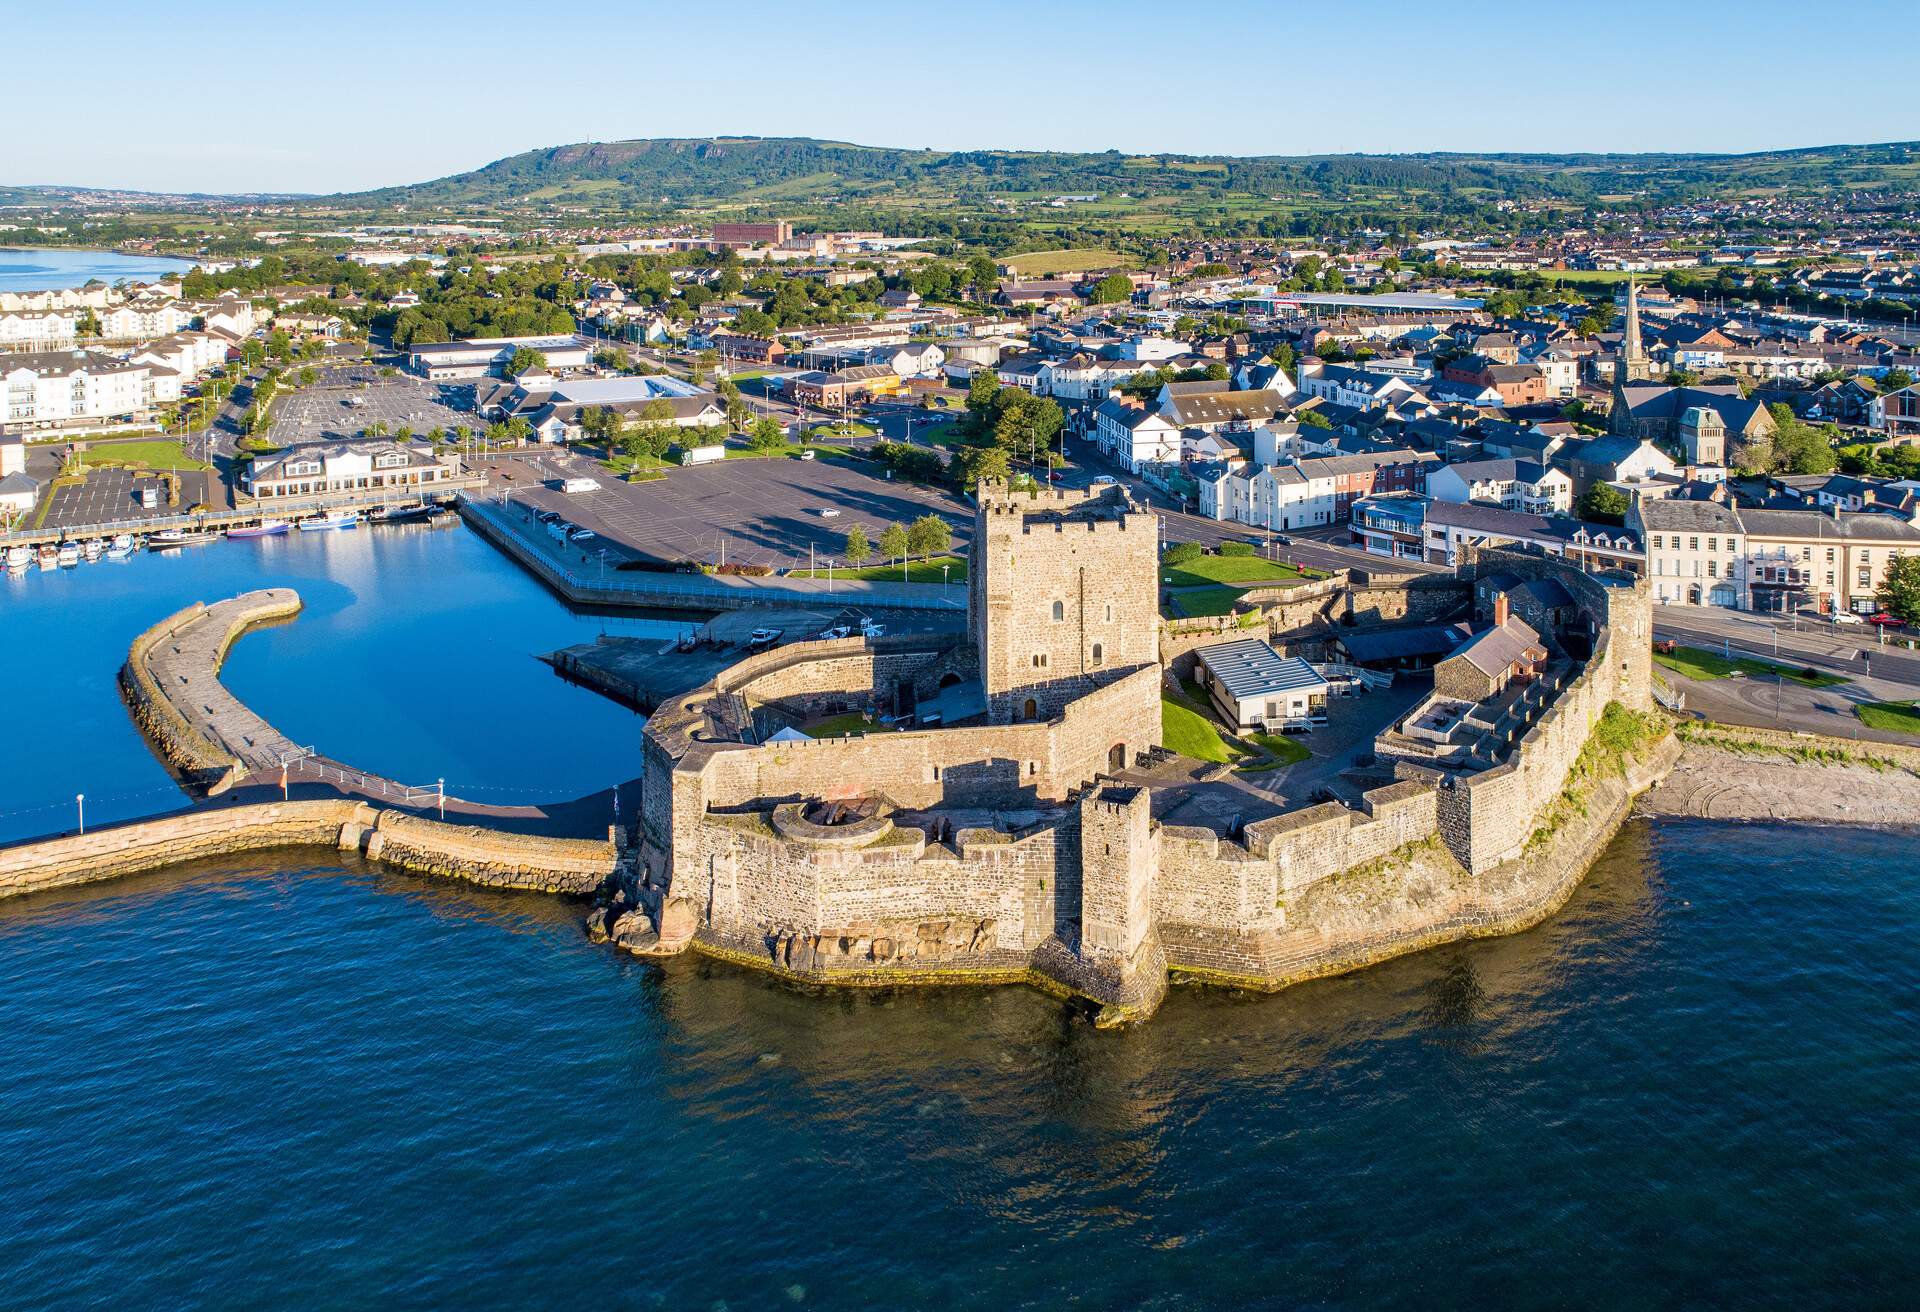 A medieval fortified castle overlooking a harbour entrance and inland villages.